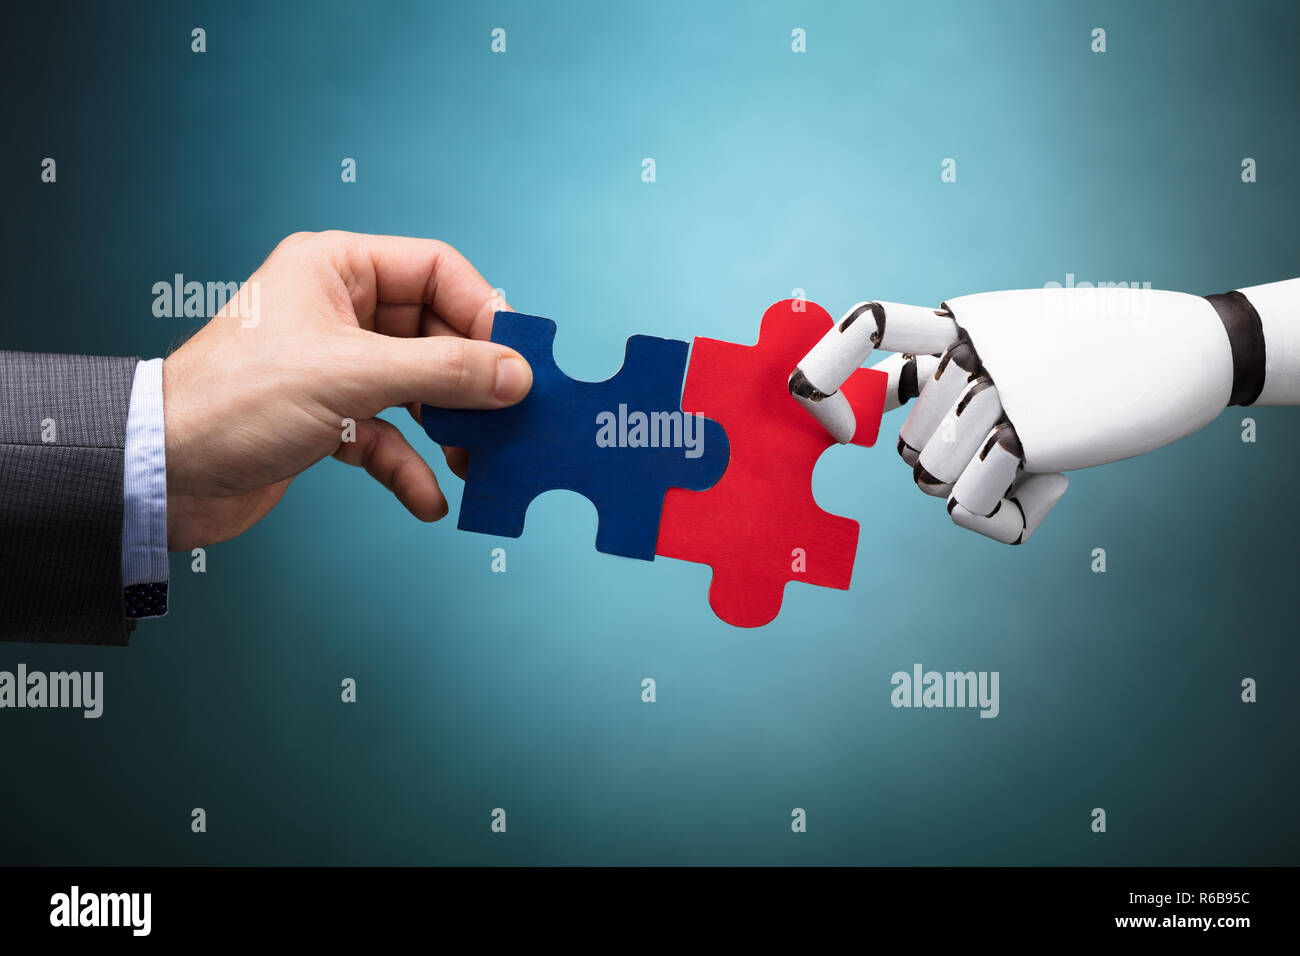 Businessperson And Robot Holding Jigsaw Puzzle Stock Photo